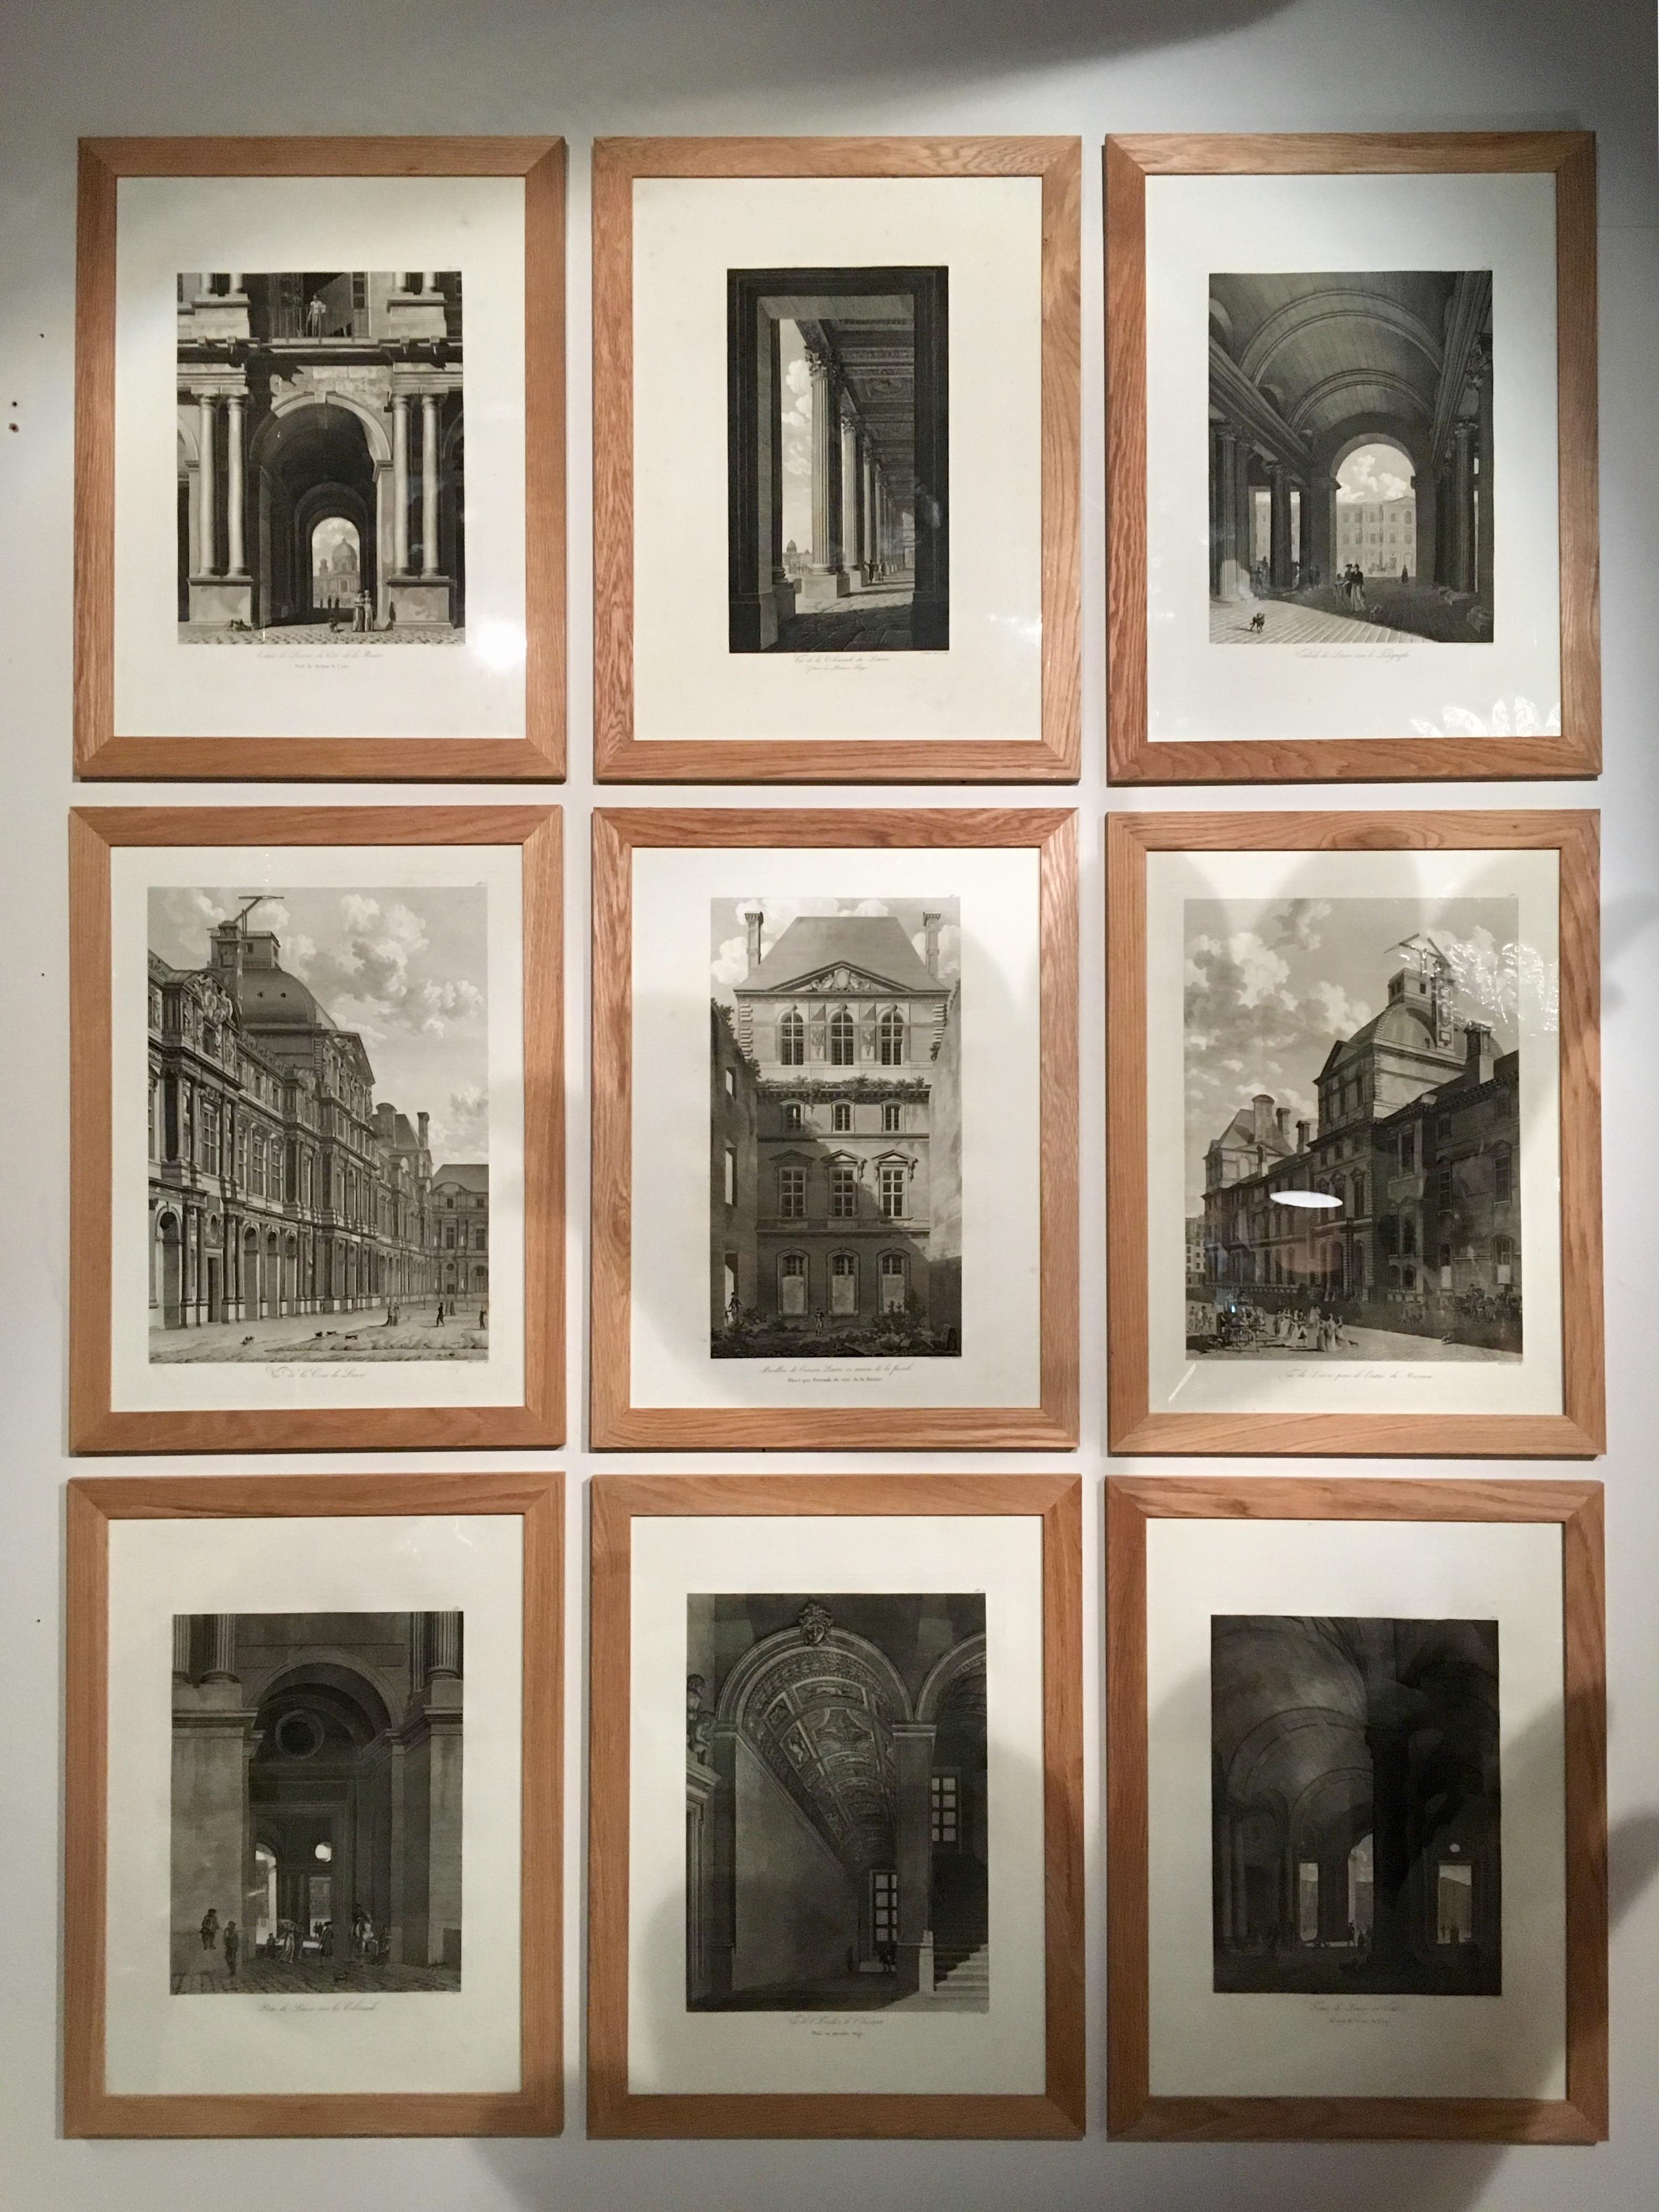 Very nice and rare suite of 9 engravings early 19th (1805) representing the architecture (views) of the Palace of the Louvre, Paris, France.
Engraved and designed by Balard.
These engravings were made for a work offered to the Emperor Napoleon